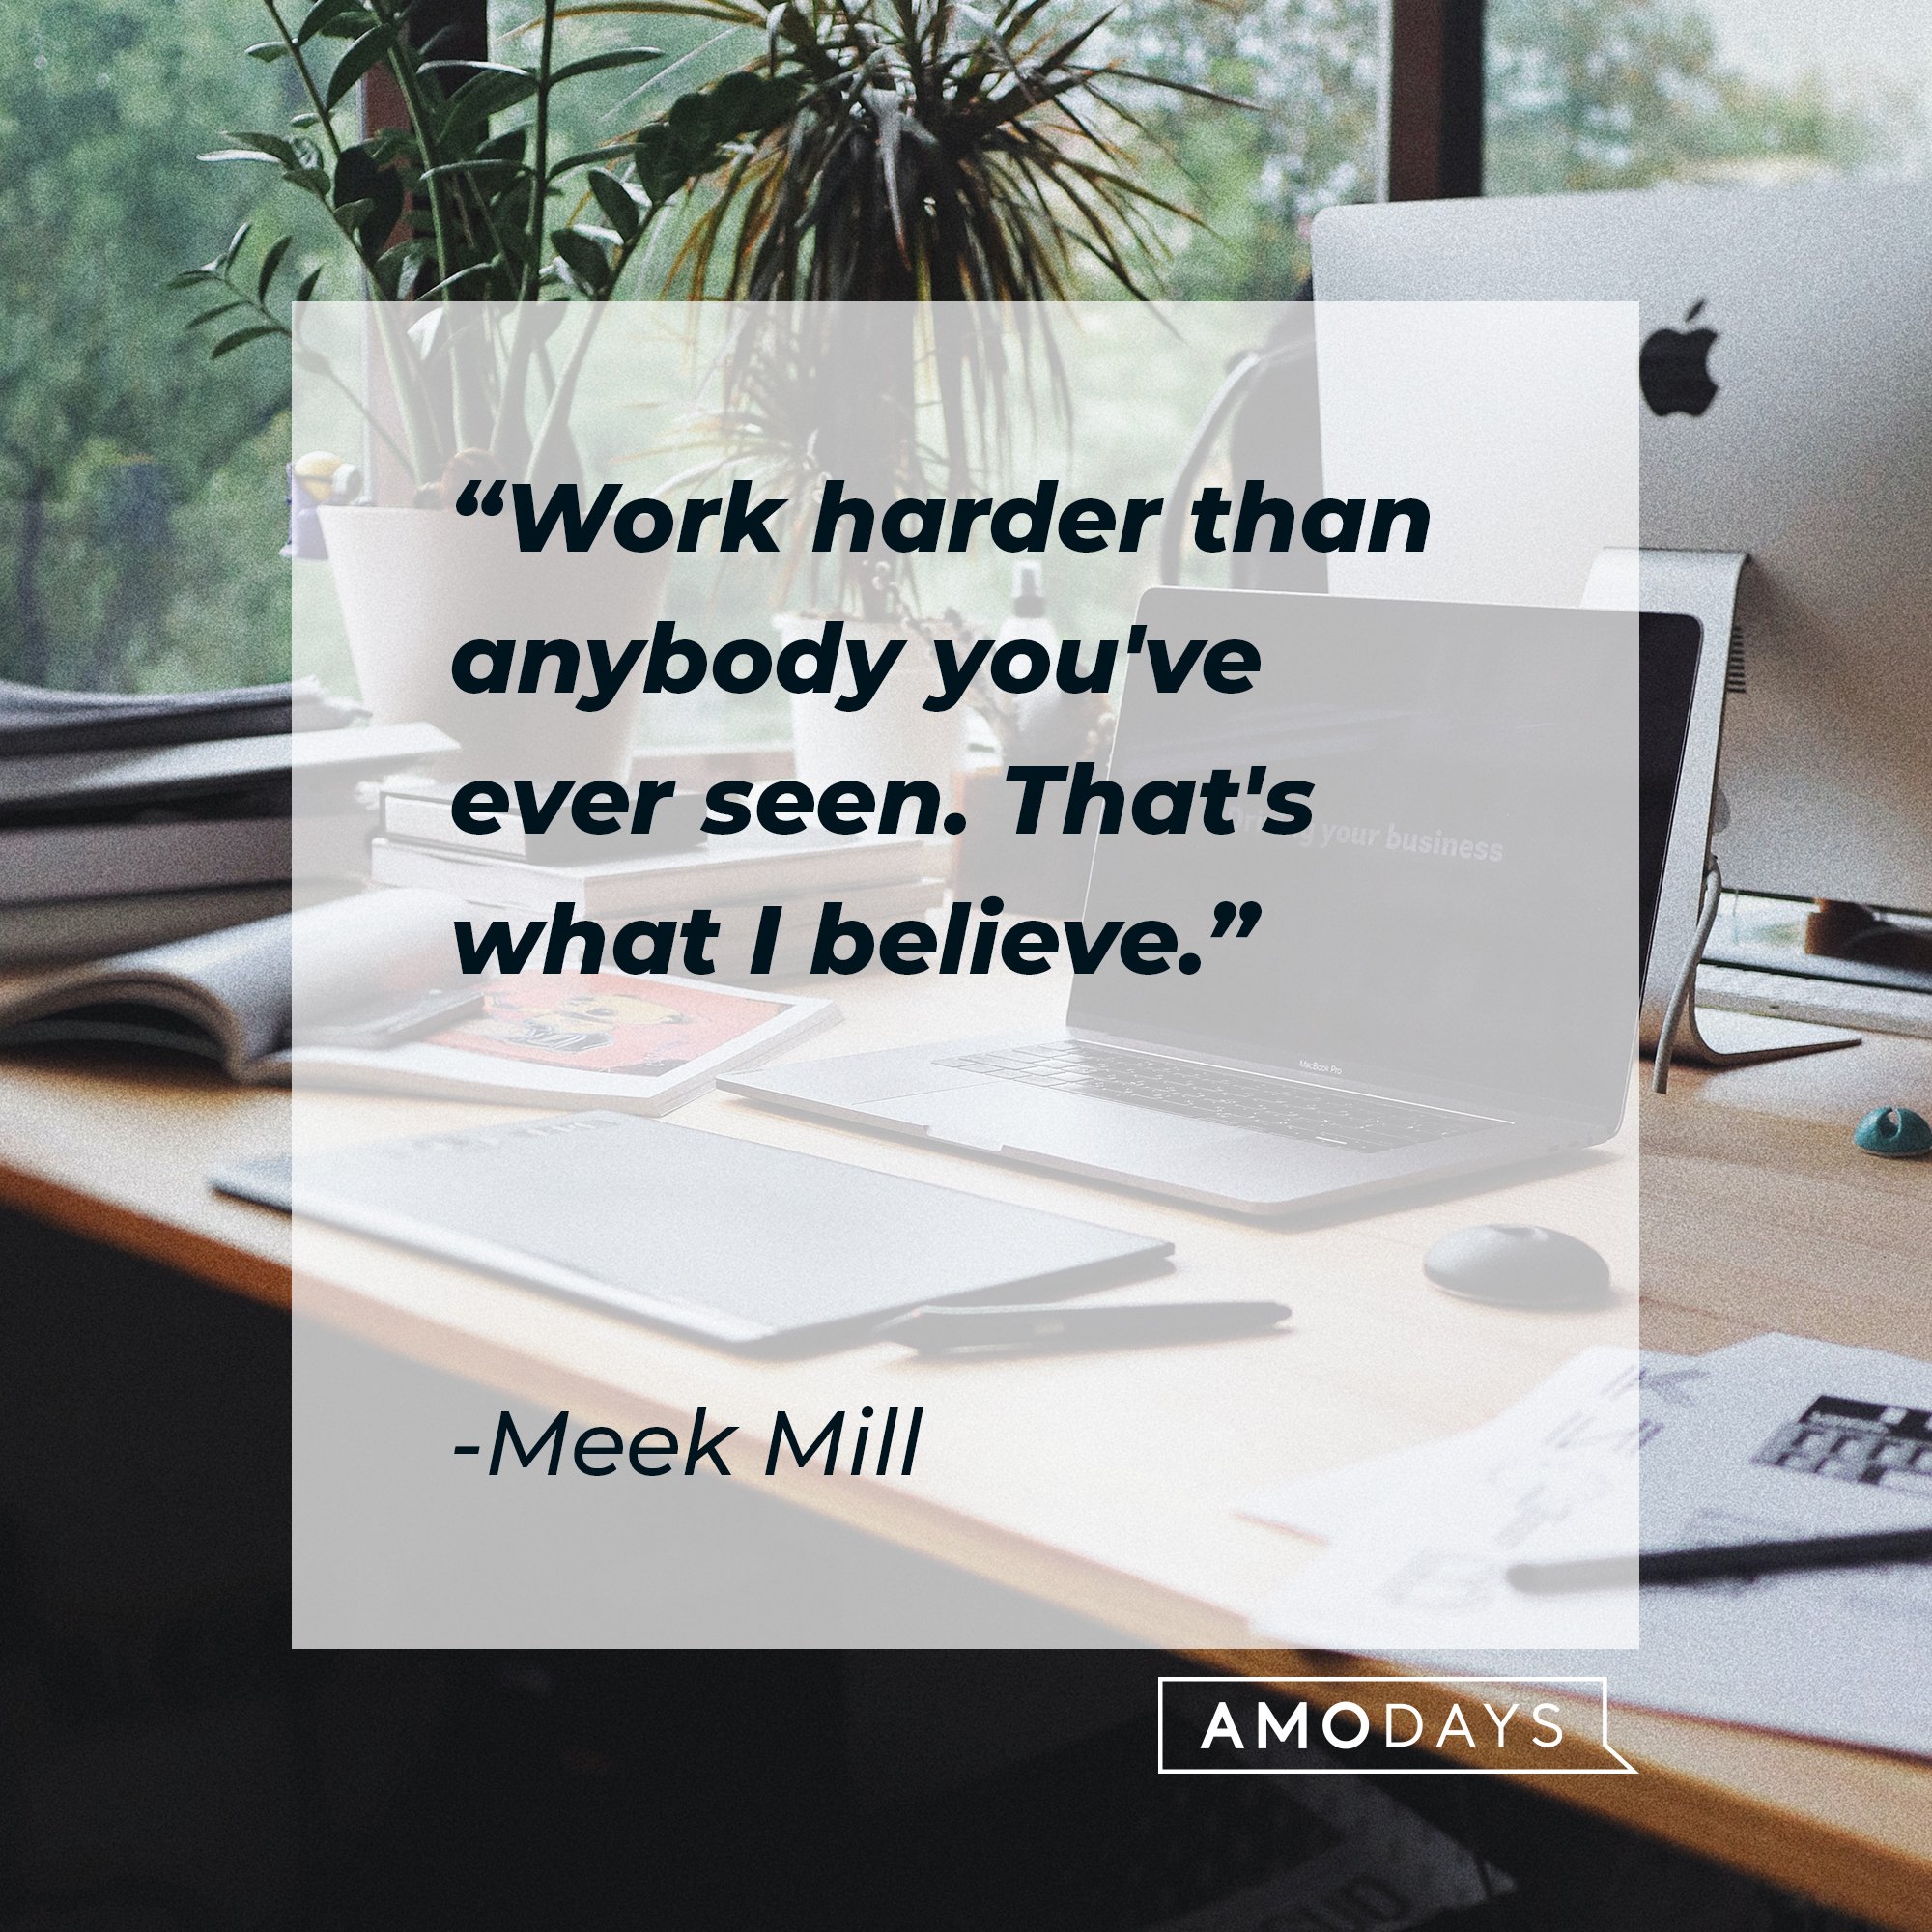 Meek Mill’s quote: “Work harder than anybody you’ve ever seen. That’s what I believe.” | Image: AmoDays 